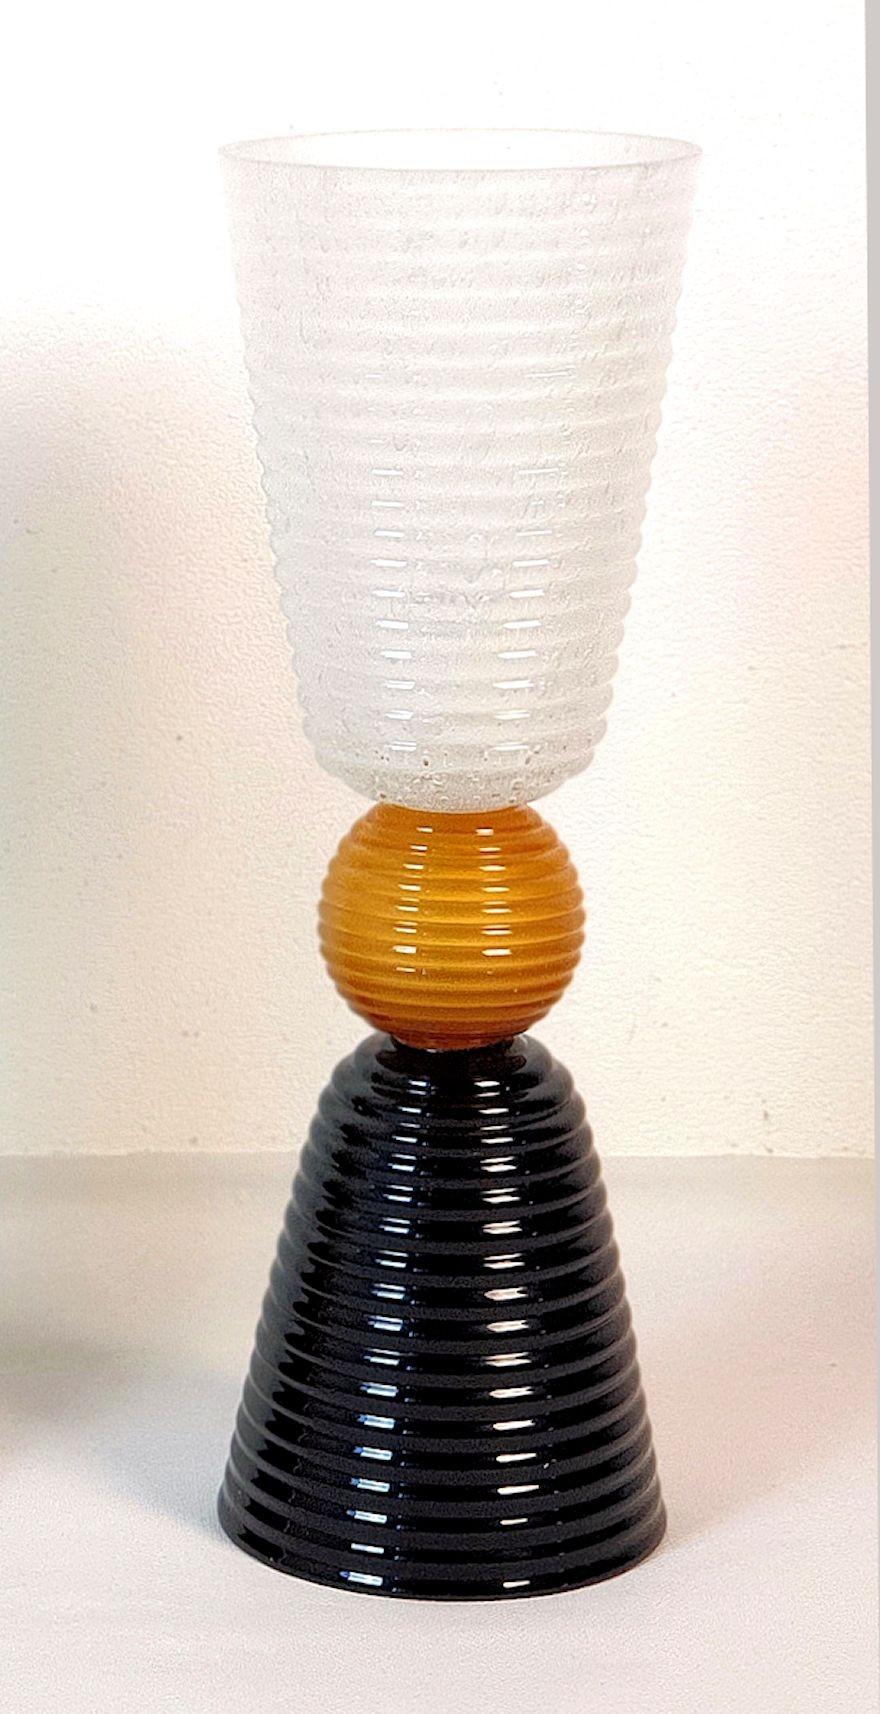 Mid-Century Modern Murano glass single table lamp, Italy 1980s.
The Italian Table Lamp is made of black and Pulegoso white ribbed frosted Murano glass, with a central honey color Murano glass ball.
The light bulb is nested in the top white,